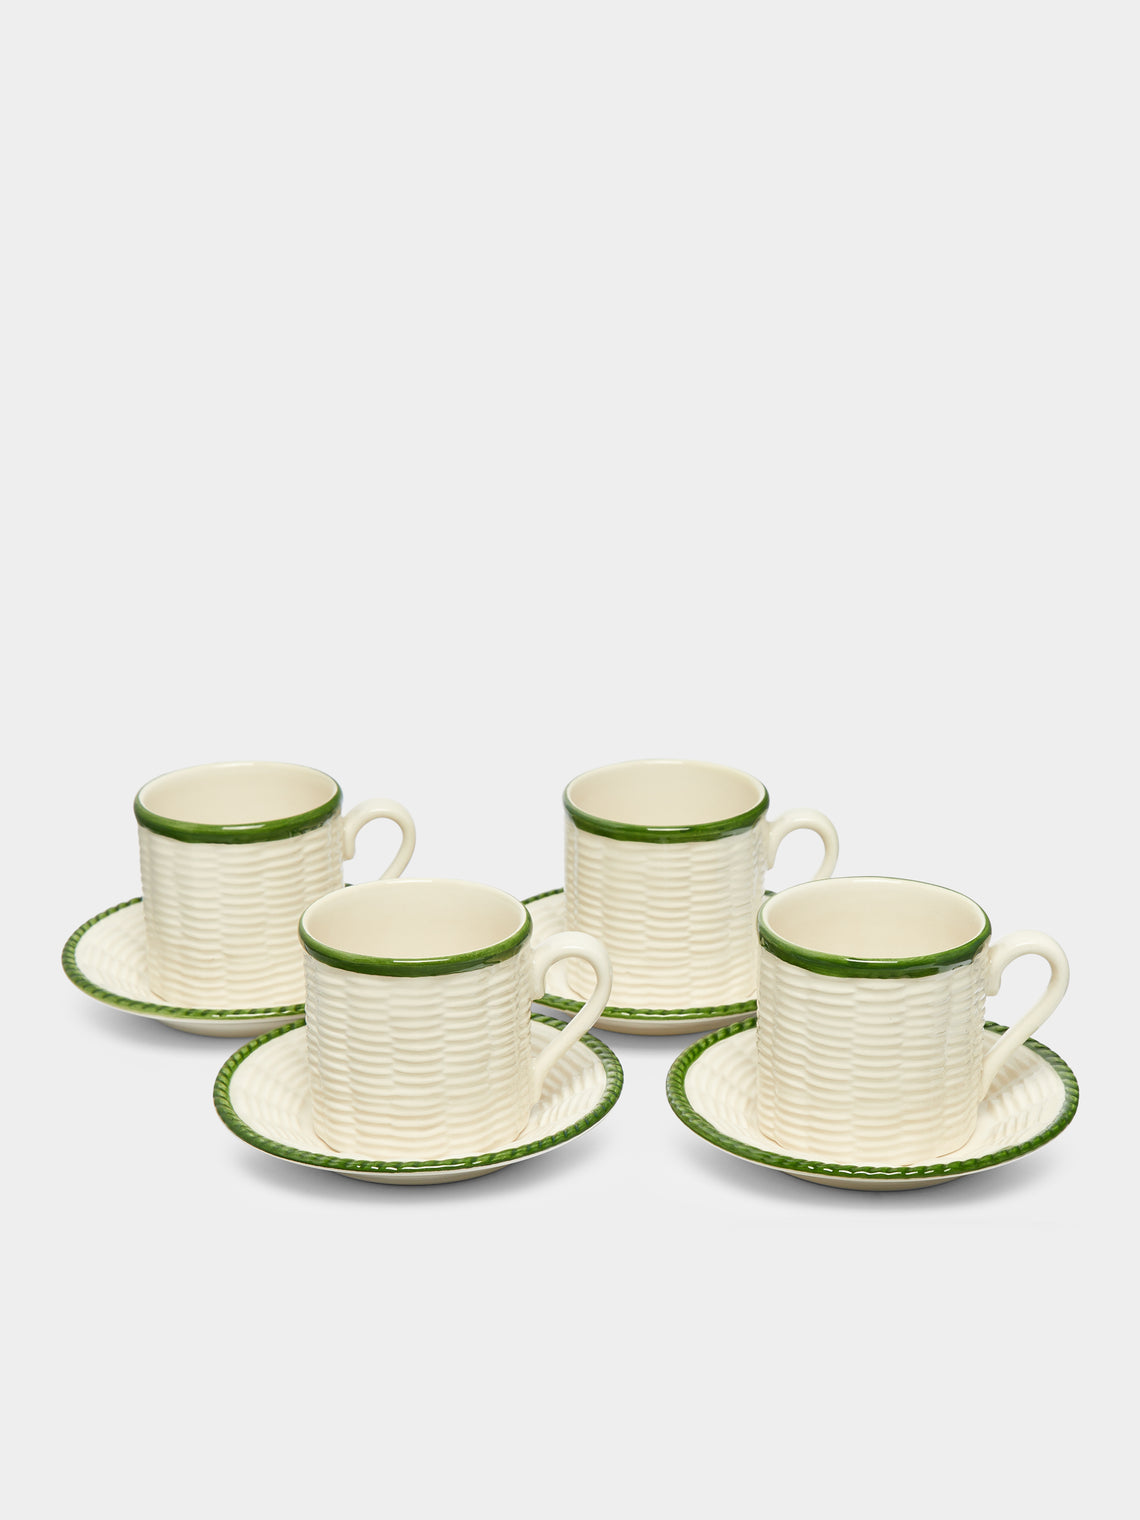 Este Ceramiche - Wicker Hand-Painted Ceramic Coffee Cups and Saucers (Set of 4) -  - ABASK